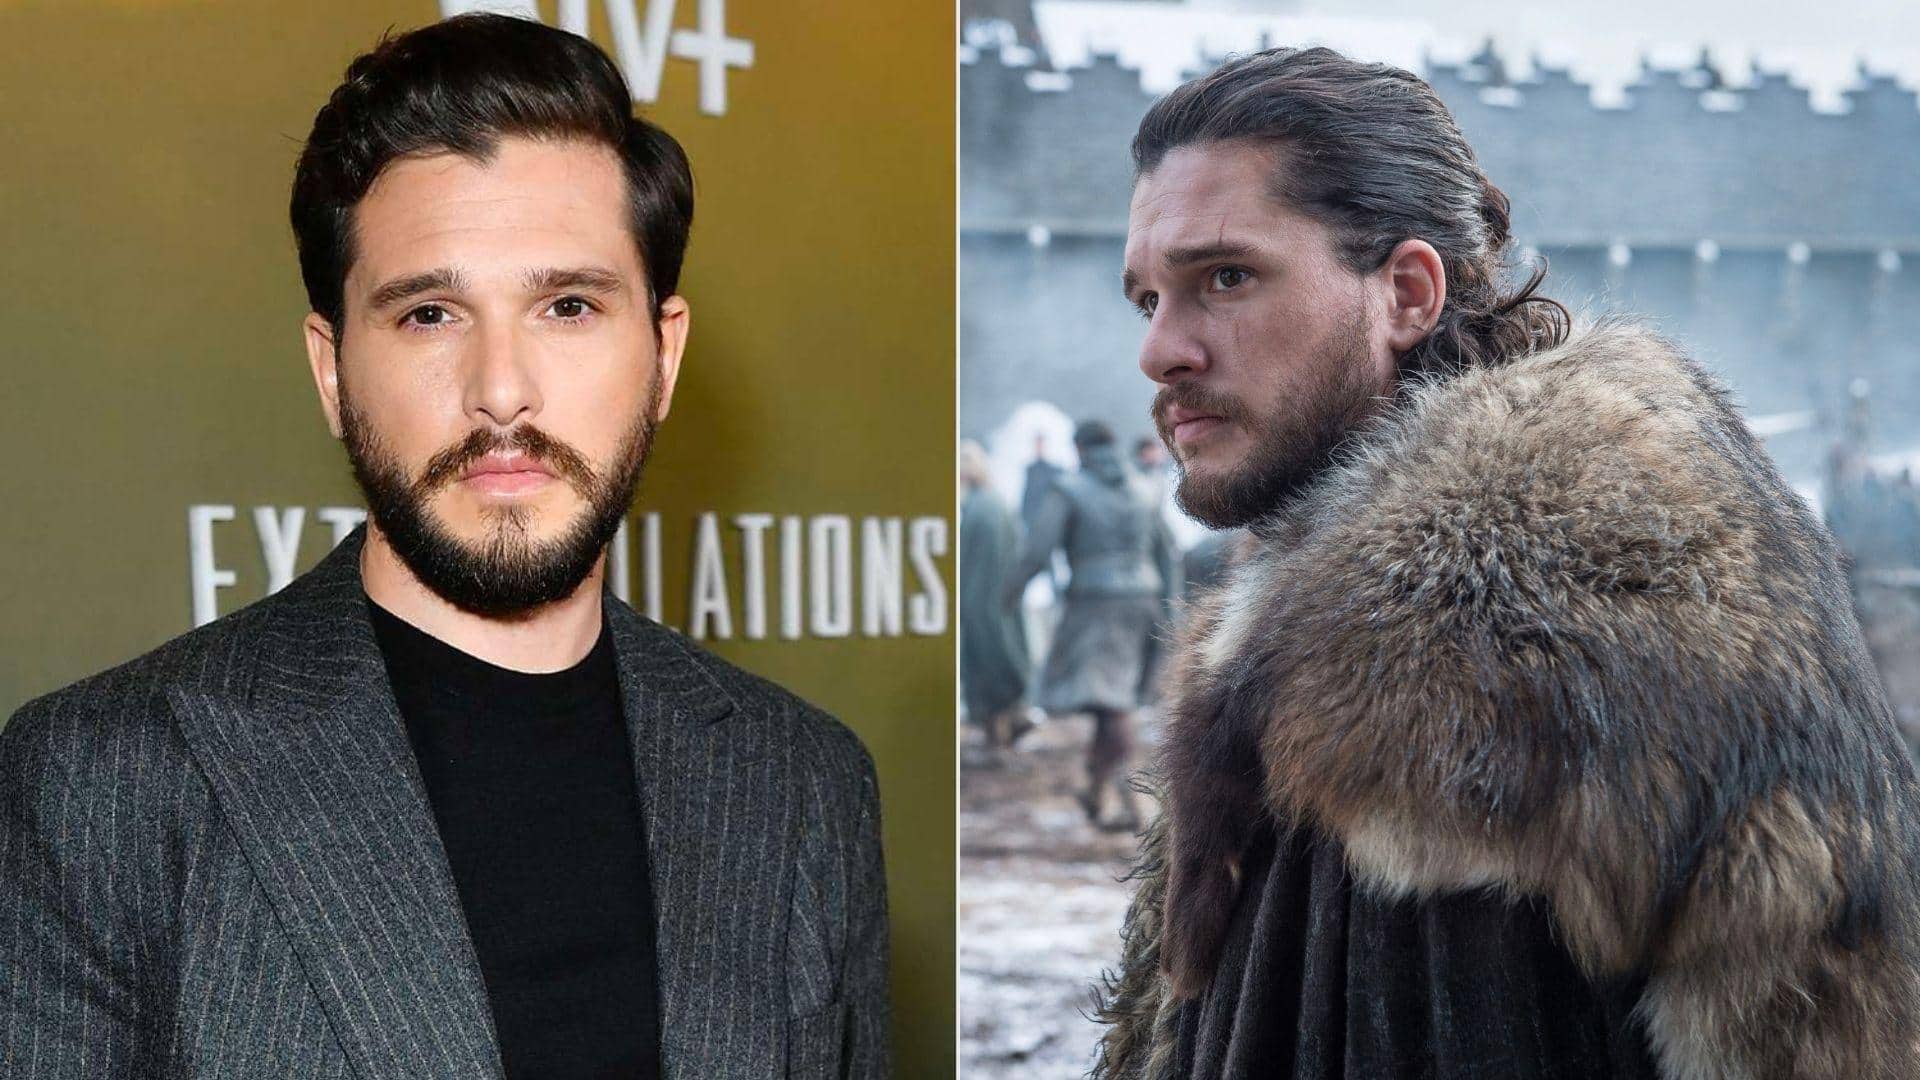 'Game of Thrones' star Kit Harington reveals ADHD diagnosis, journey